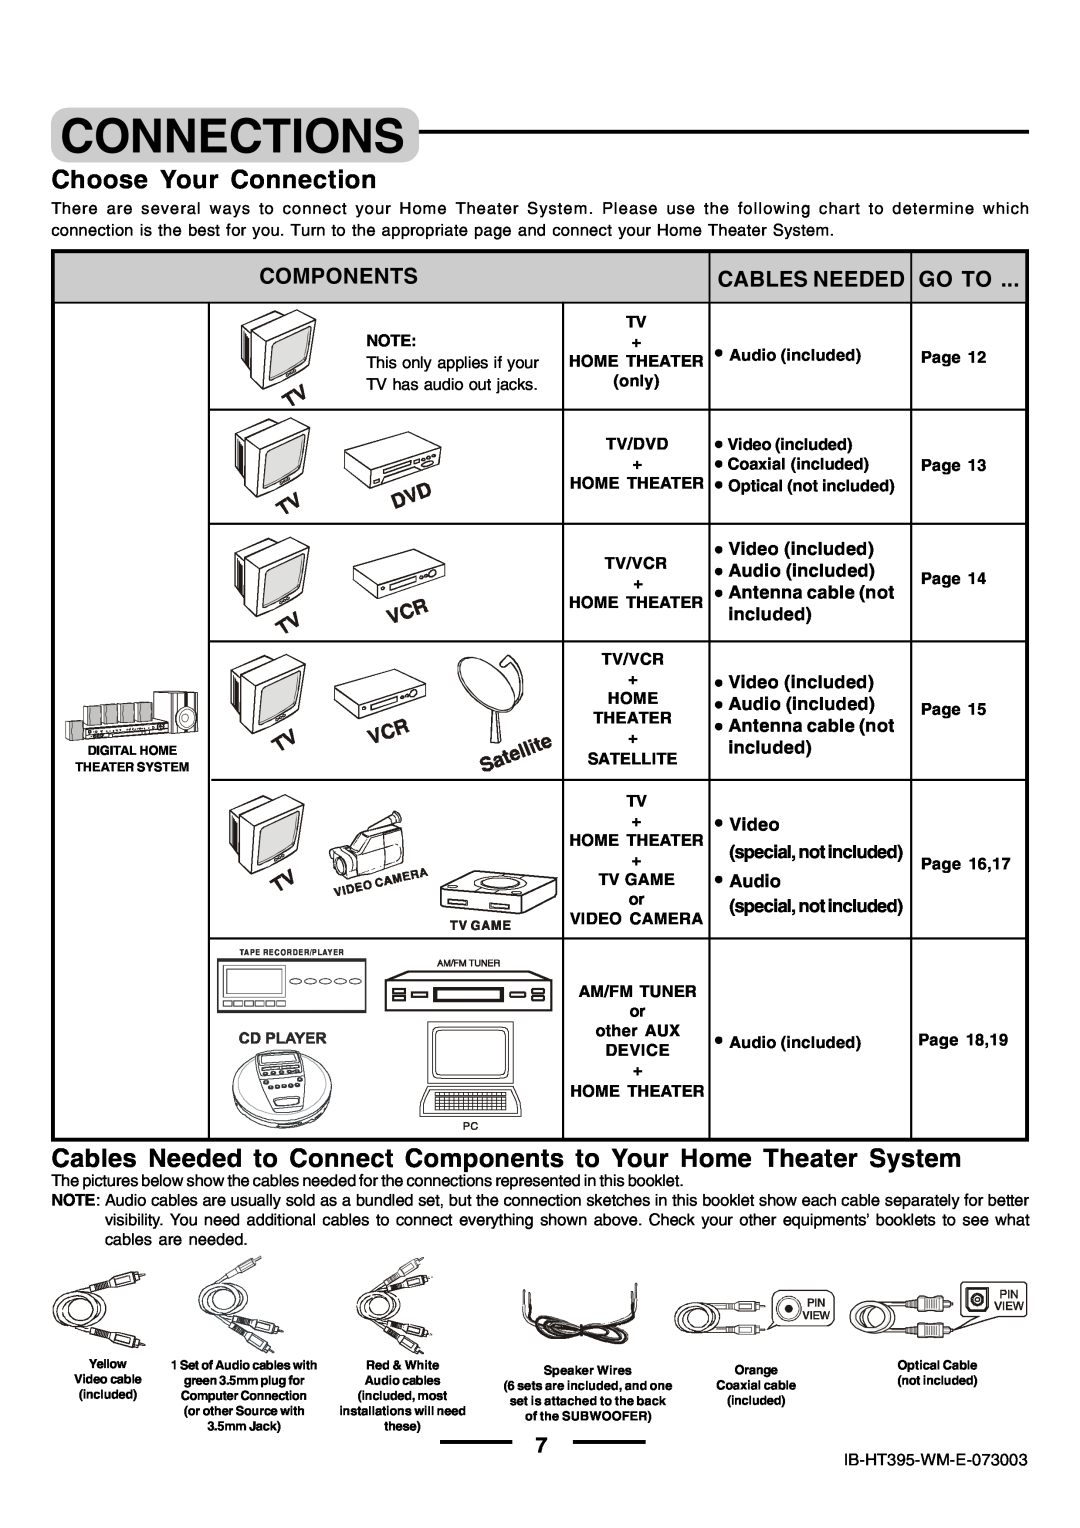 Lenoxx Electronics HT-395 manual Connections, Choose Your Connection, Components, Cables Needed Go To 